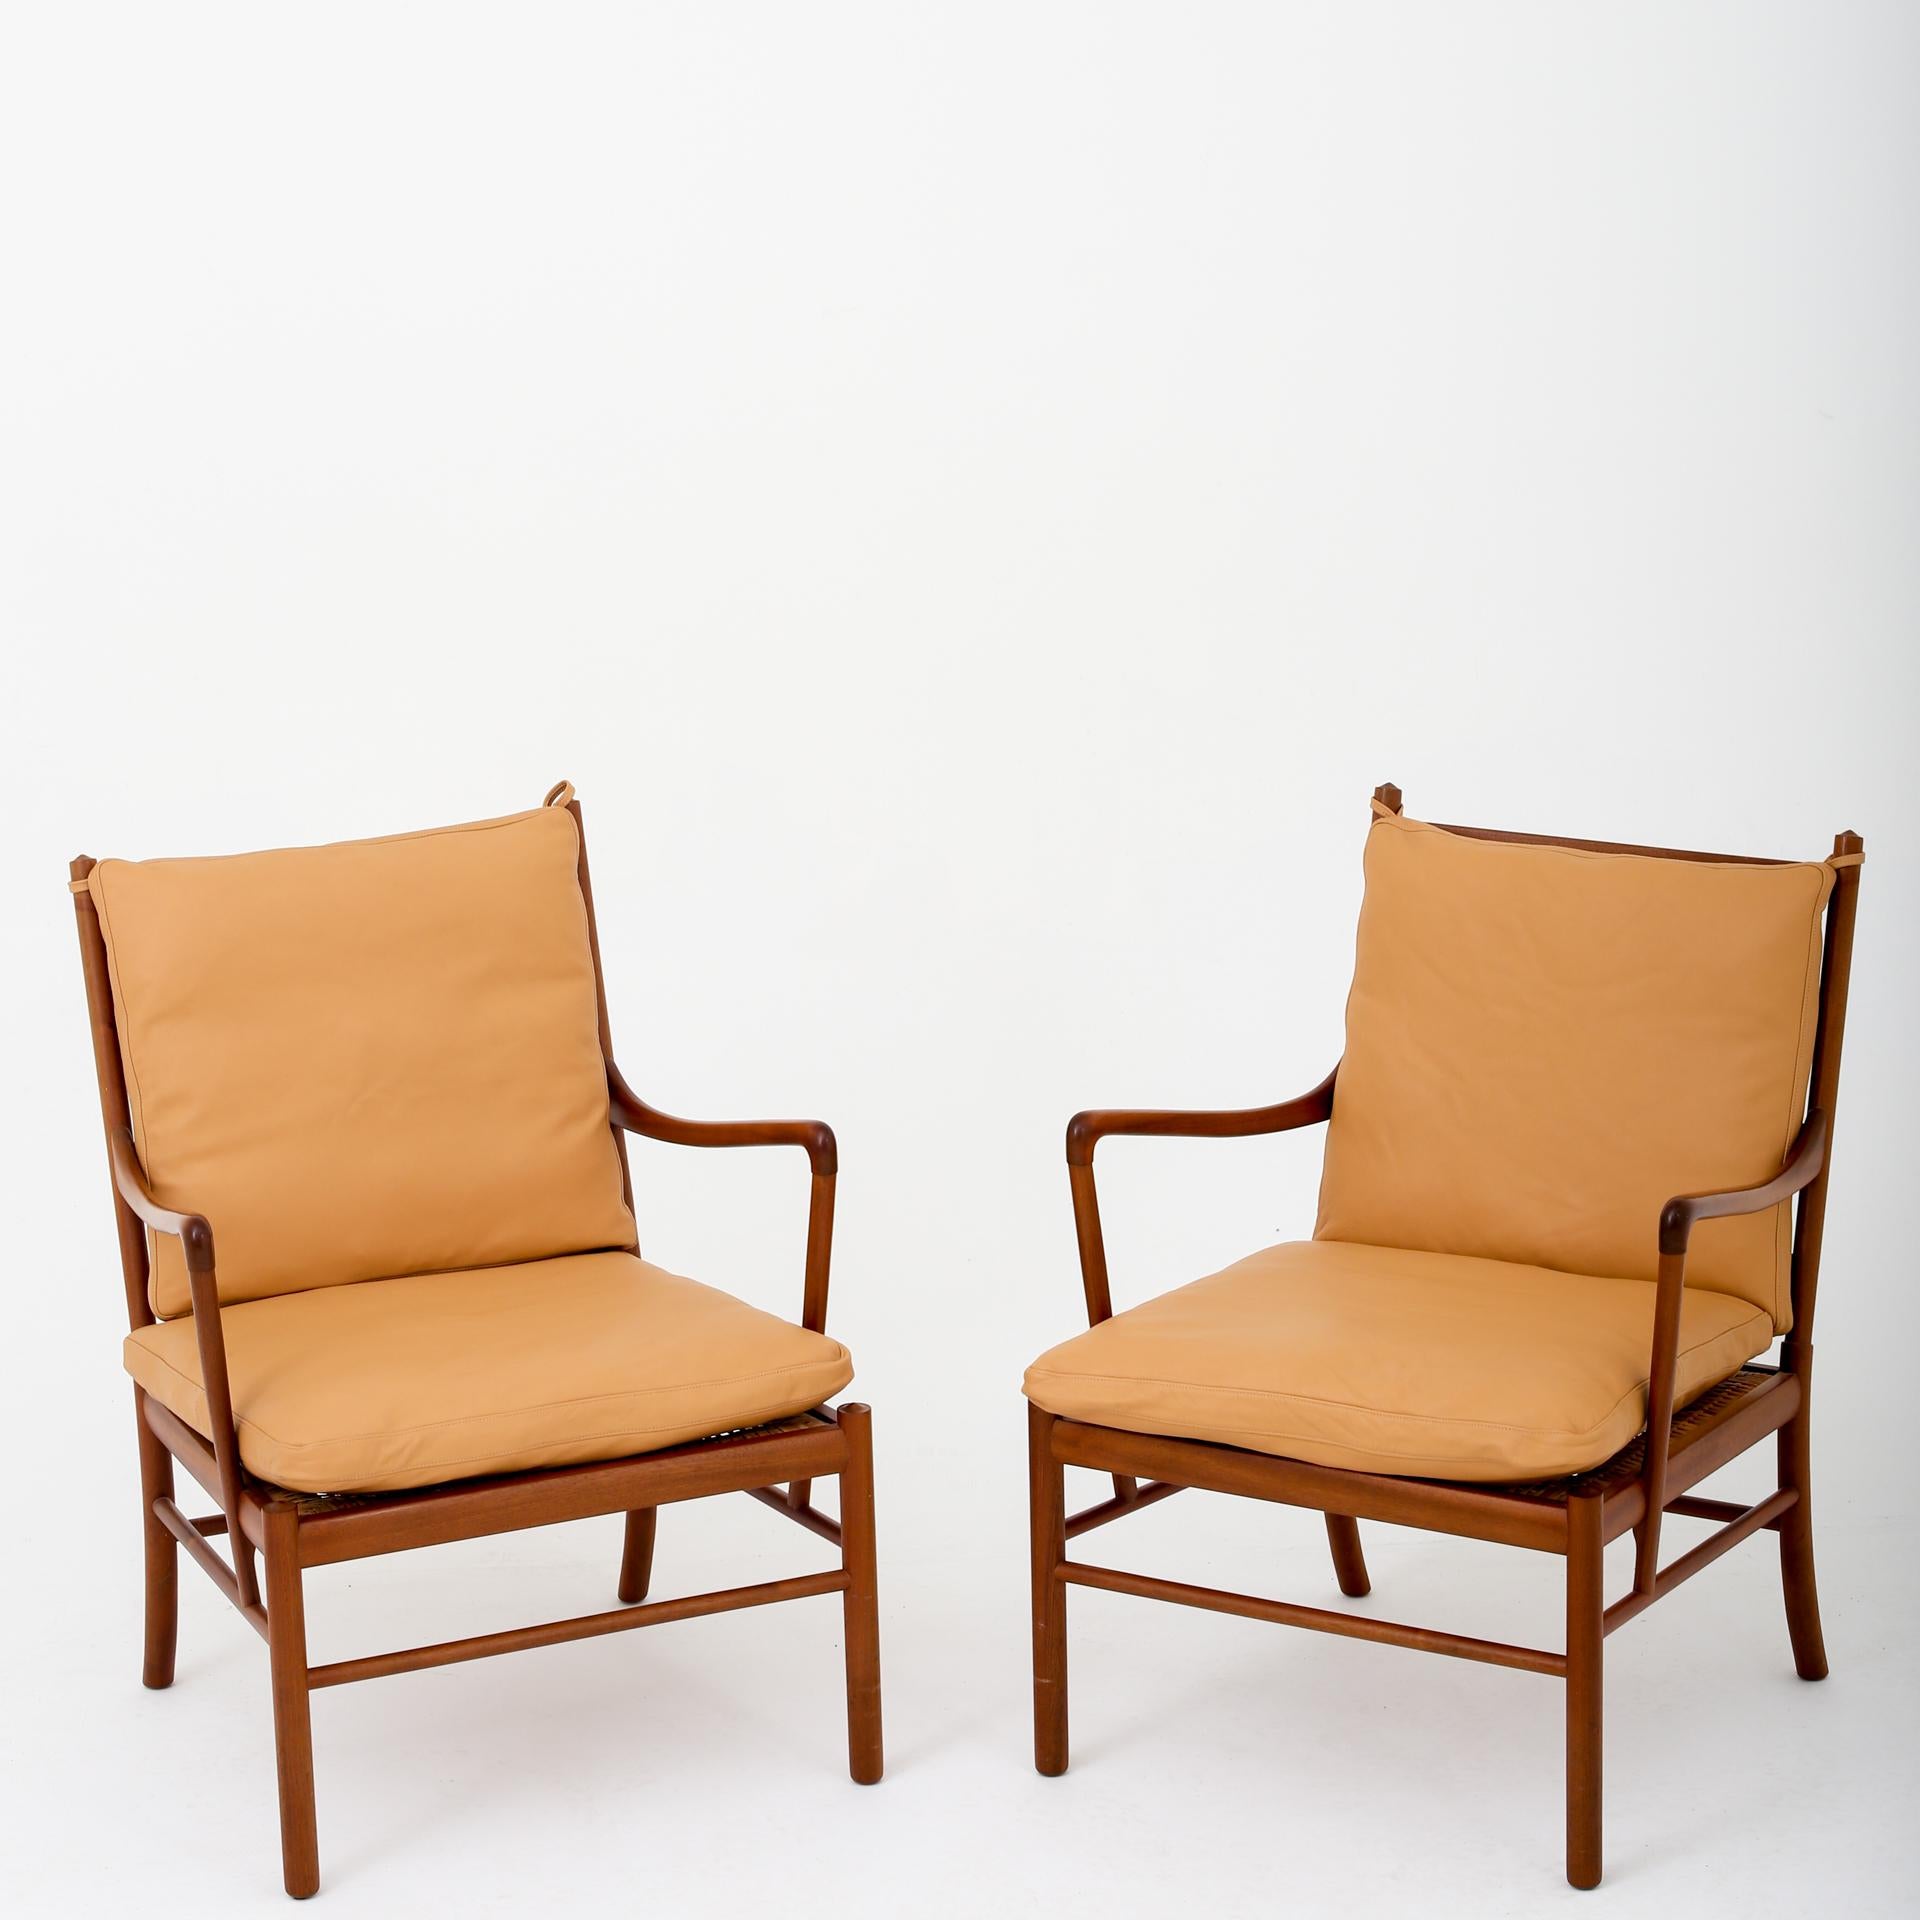 Mahogany Set of Two Pj 149 Chairs by Ole Wanscher